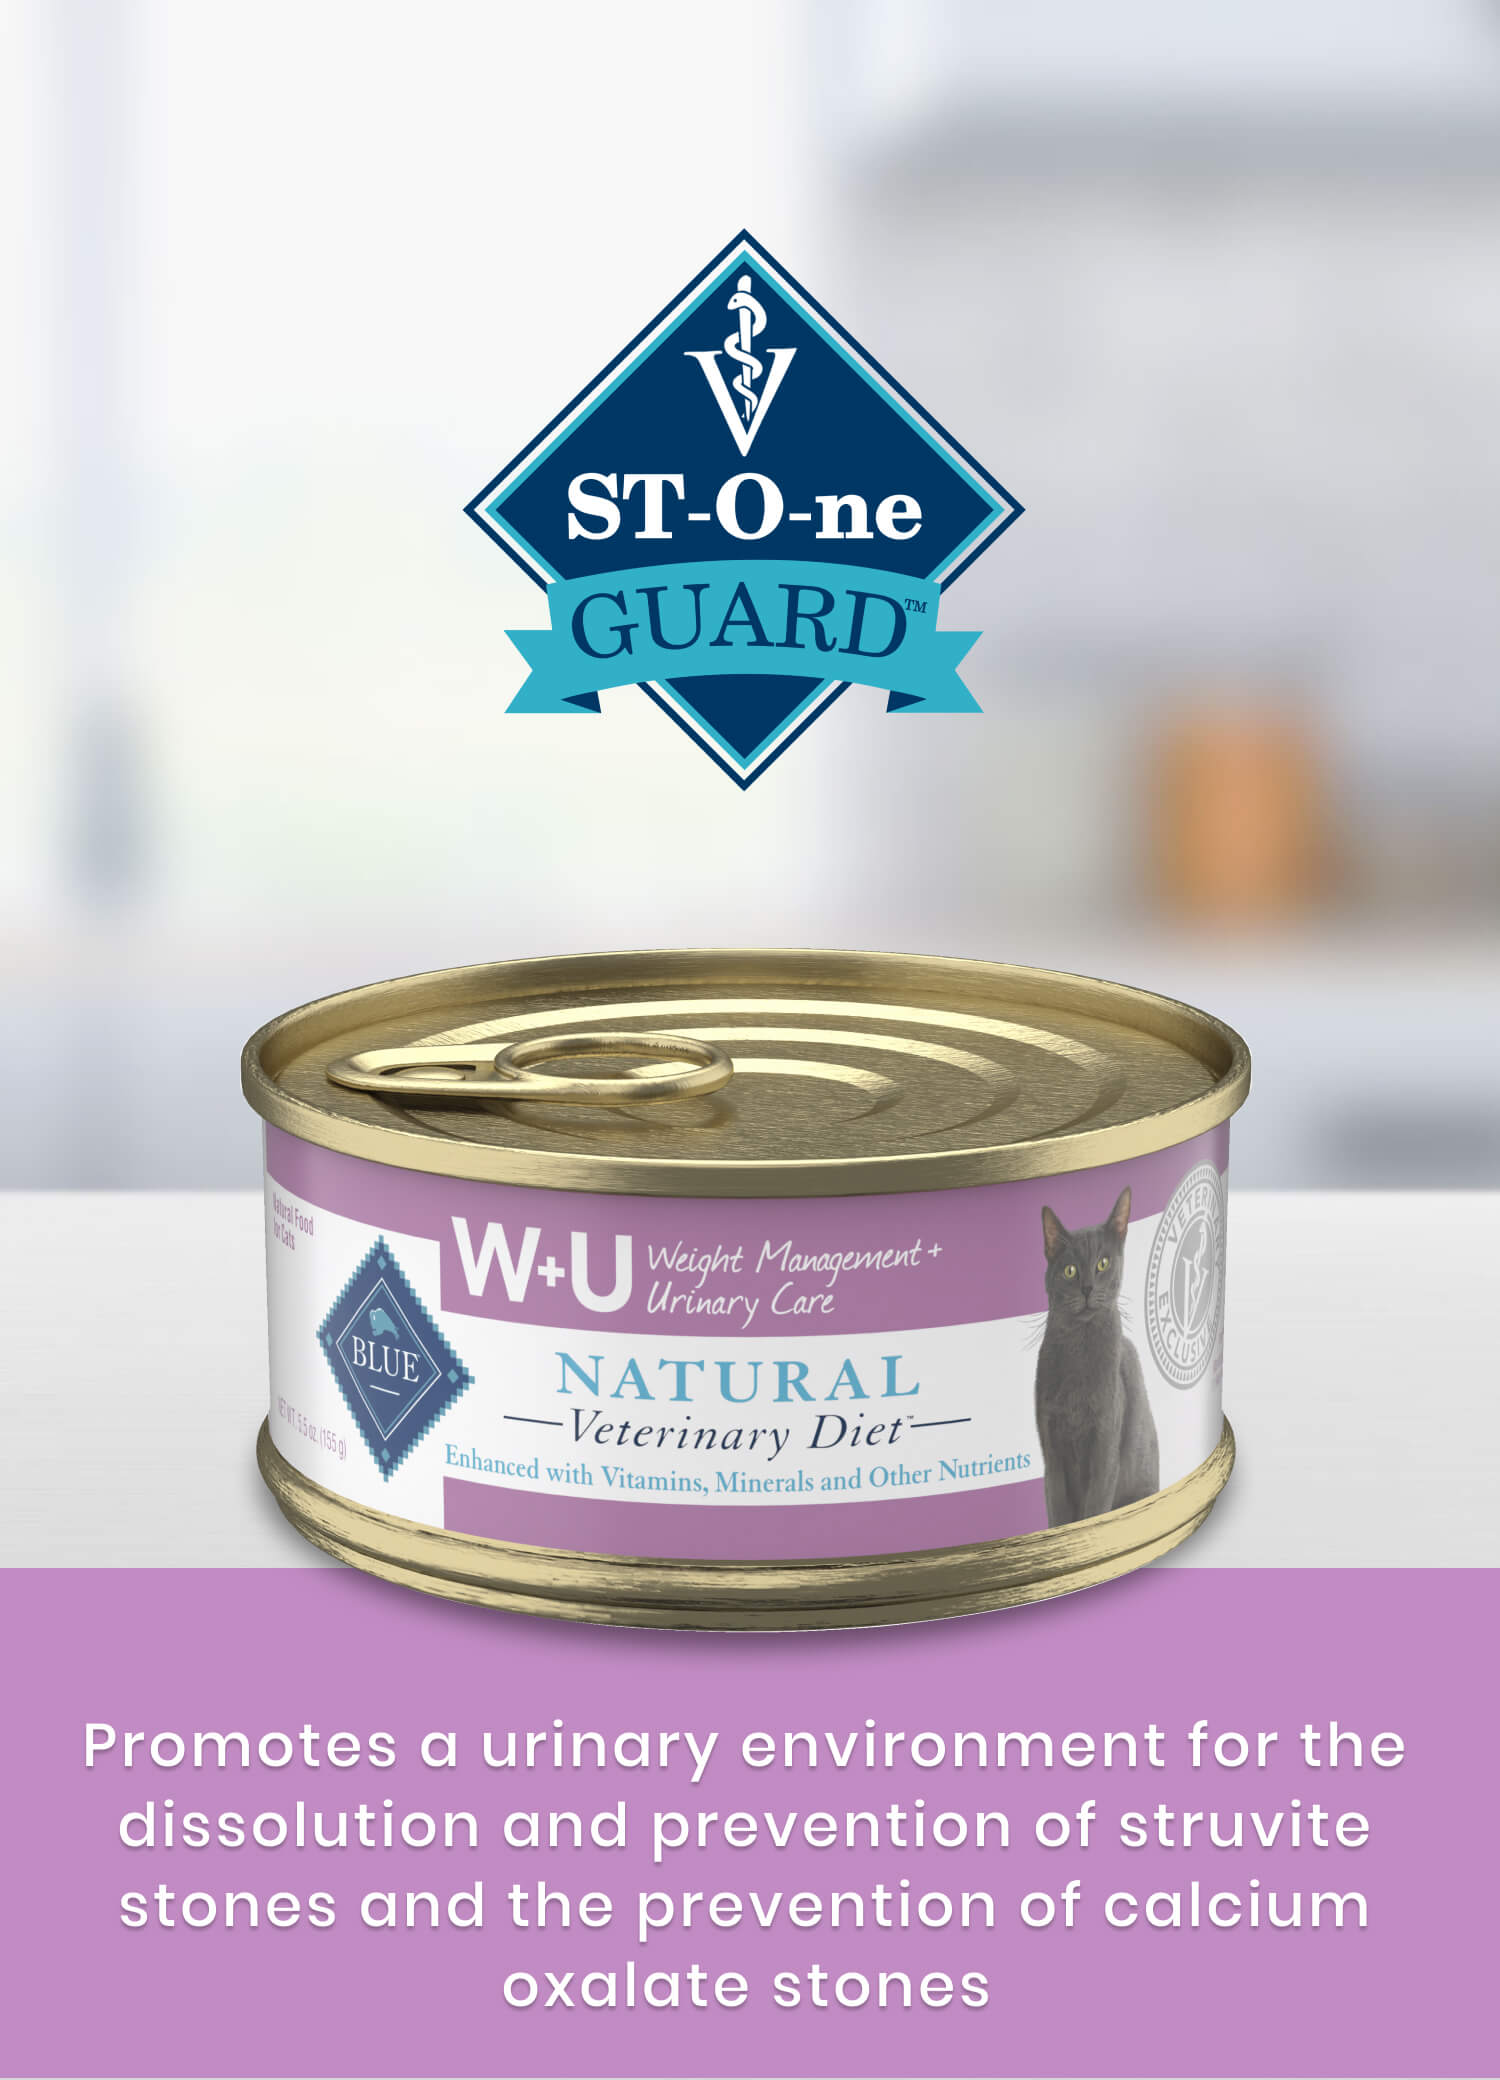 W+U Weight Management + Urinary Care St-O-ne Guard  Promotes a urinary environment for the dissolution and prevention of struvite stones and the prevention of calcium oxalate stones